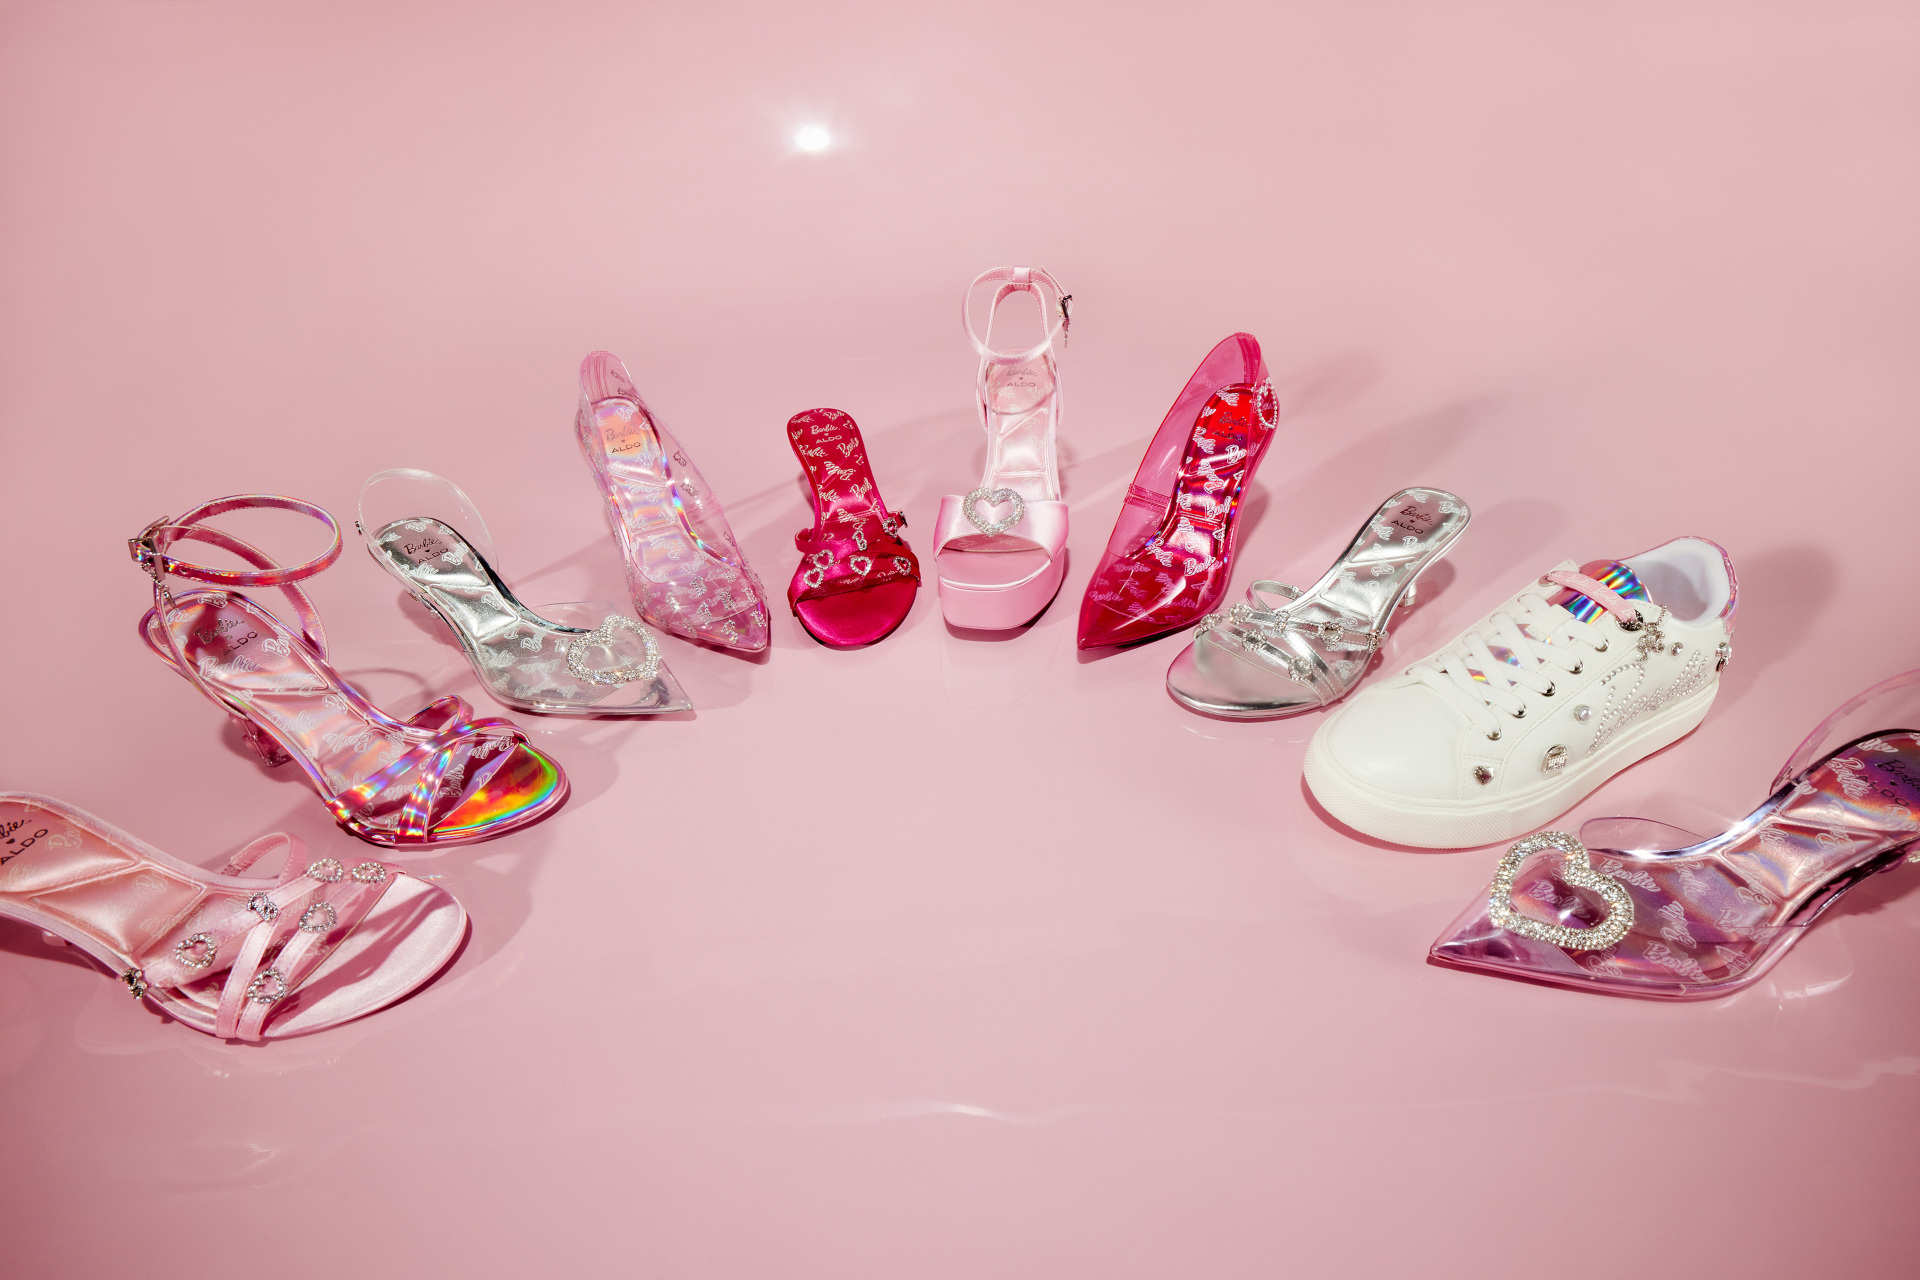 Shoes displayed in curve on pink background